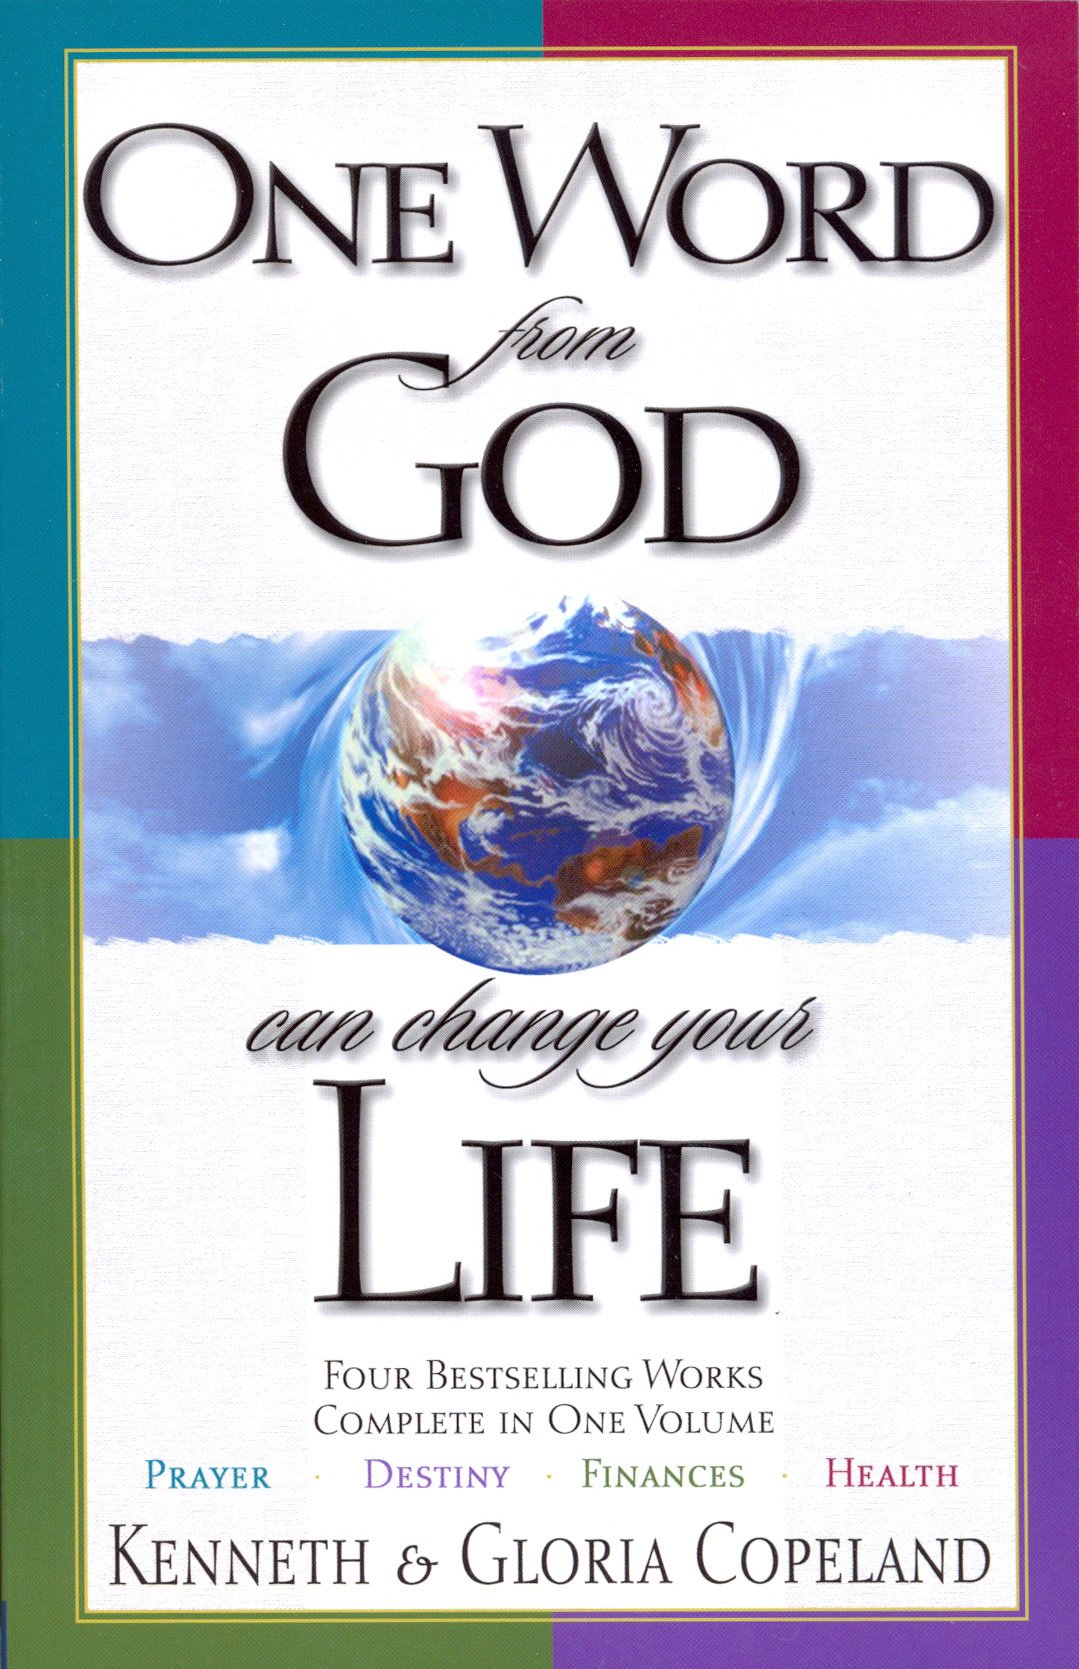 One Word from God can Change your Life